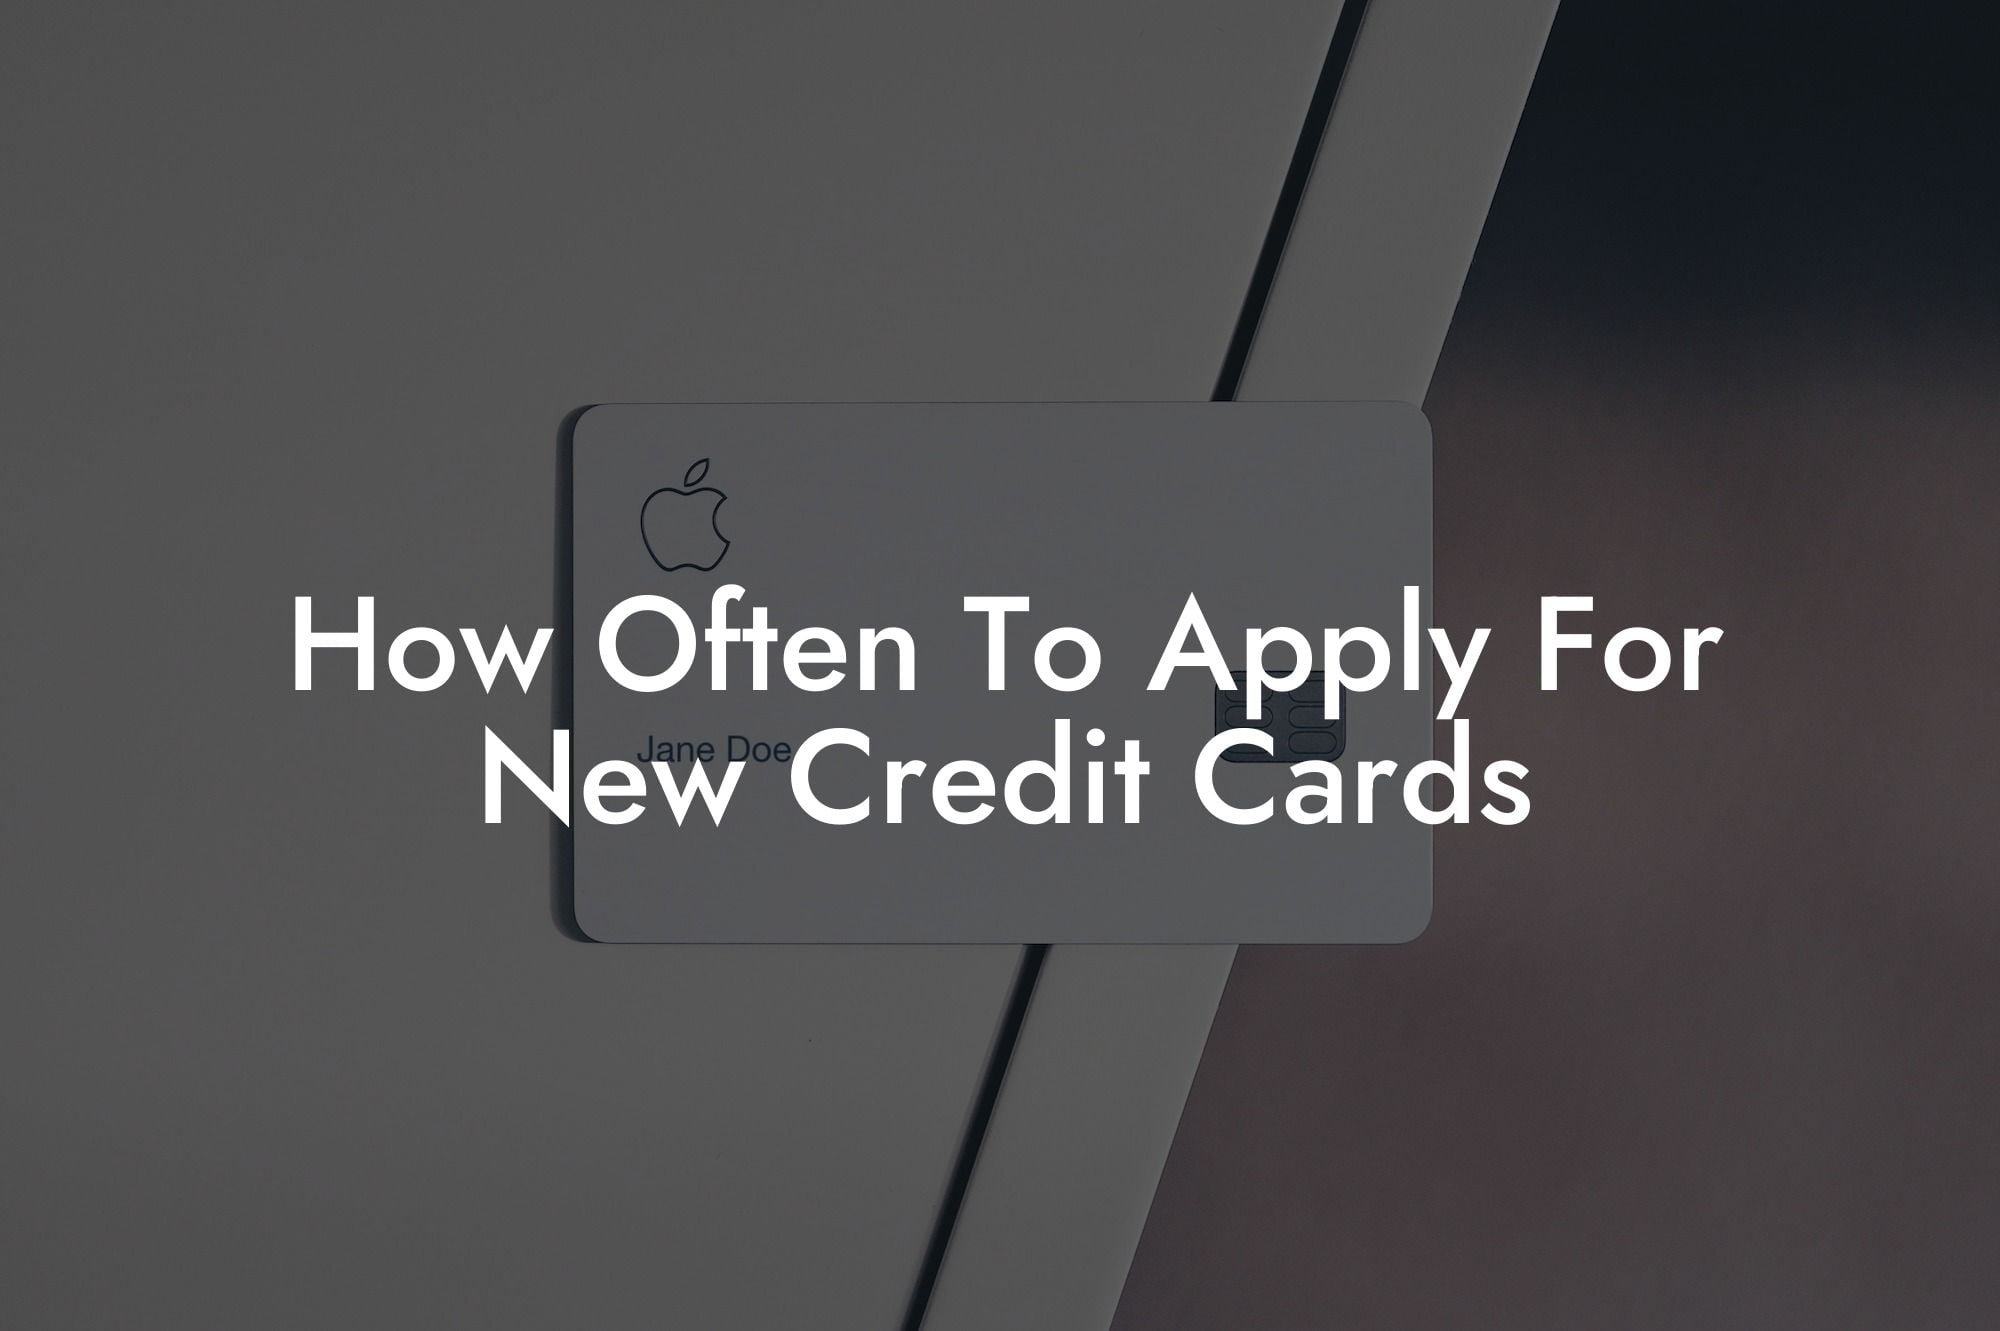 How Often To Apply For New Credit Cards